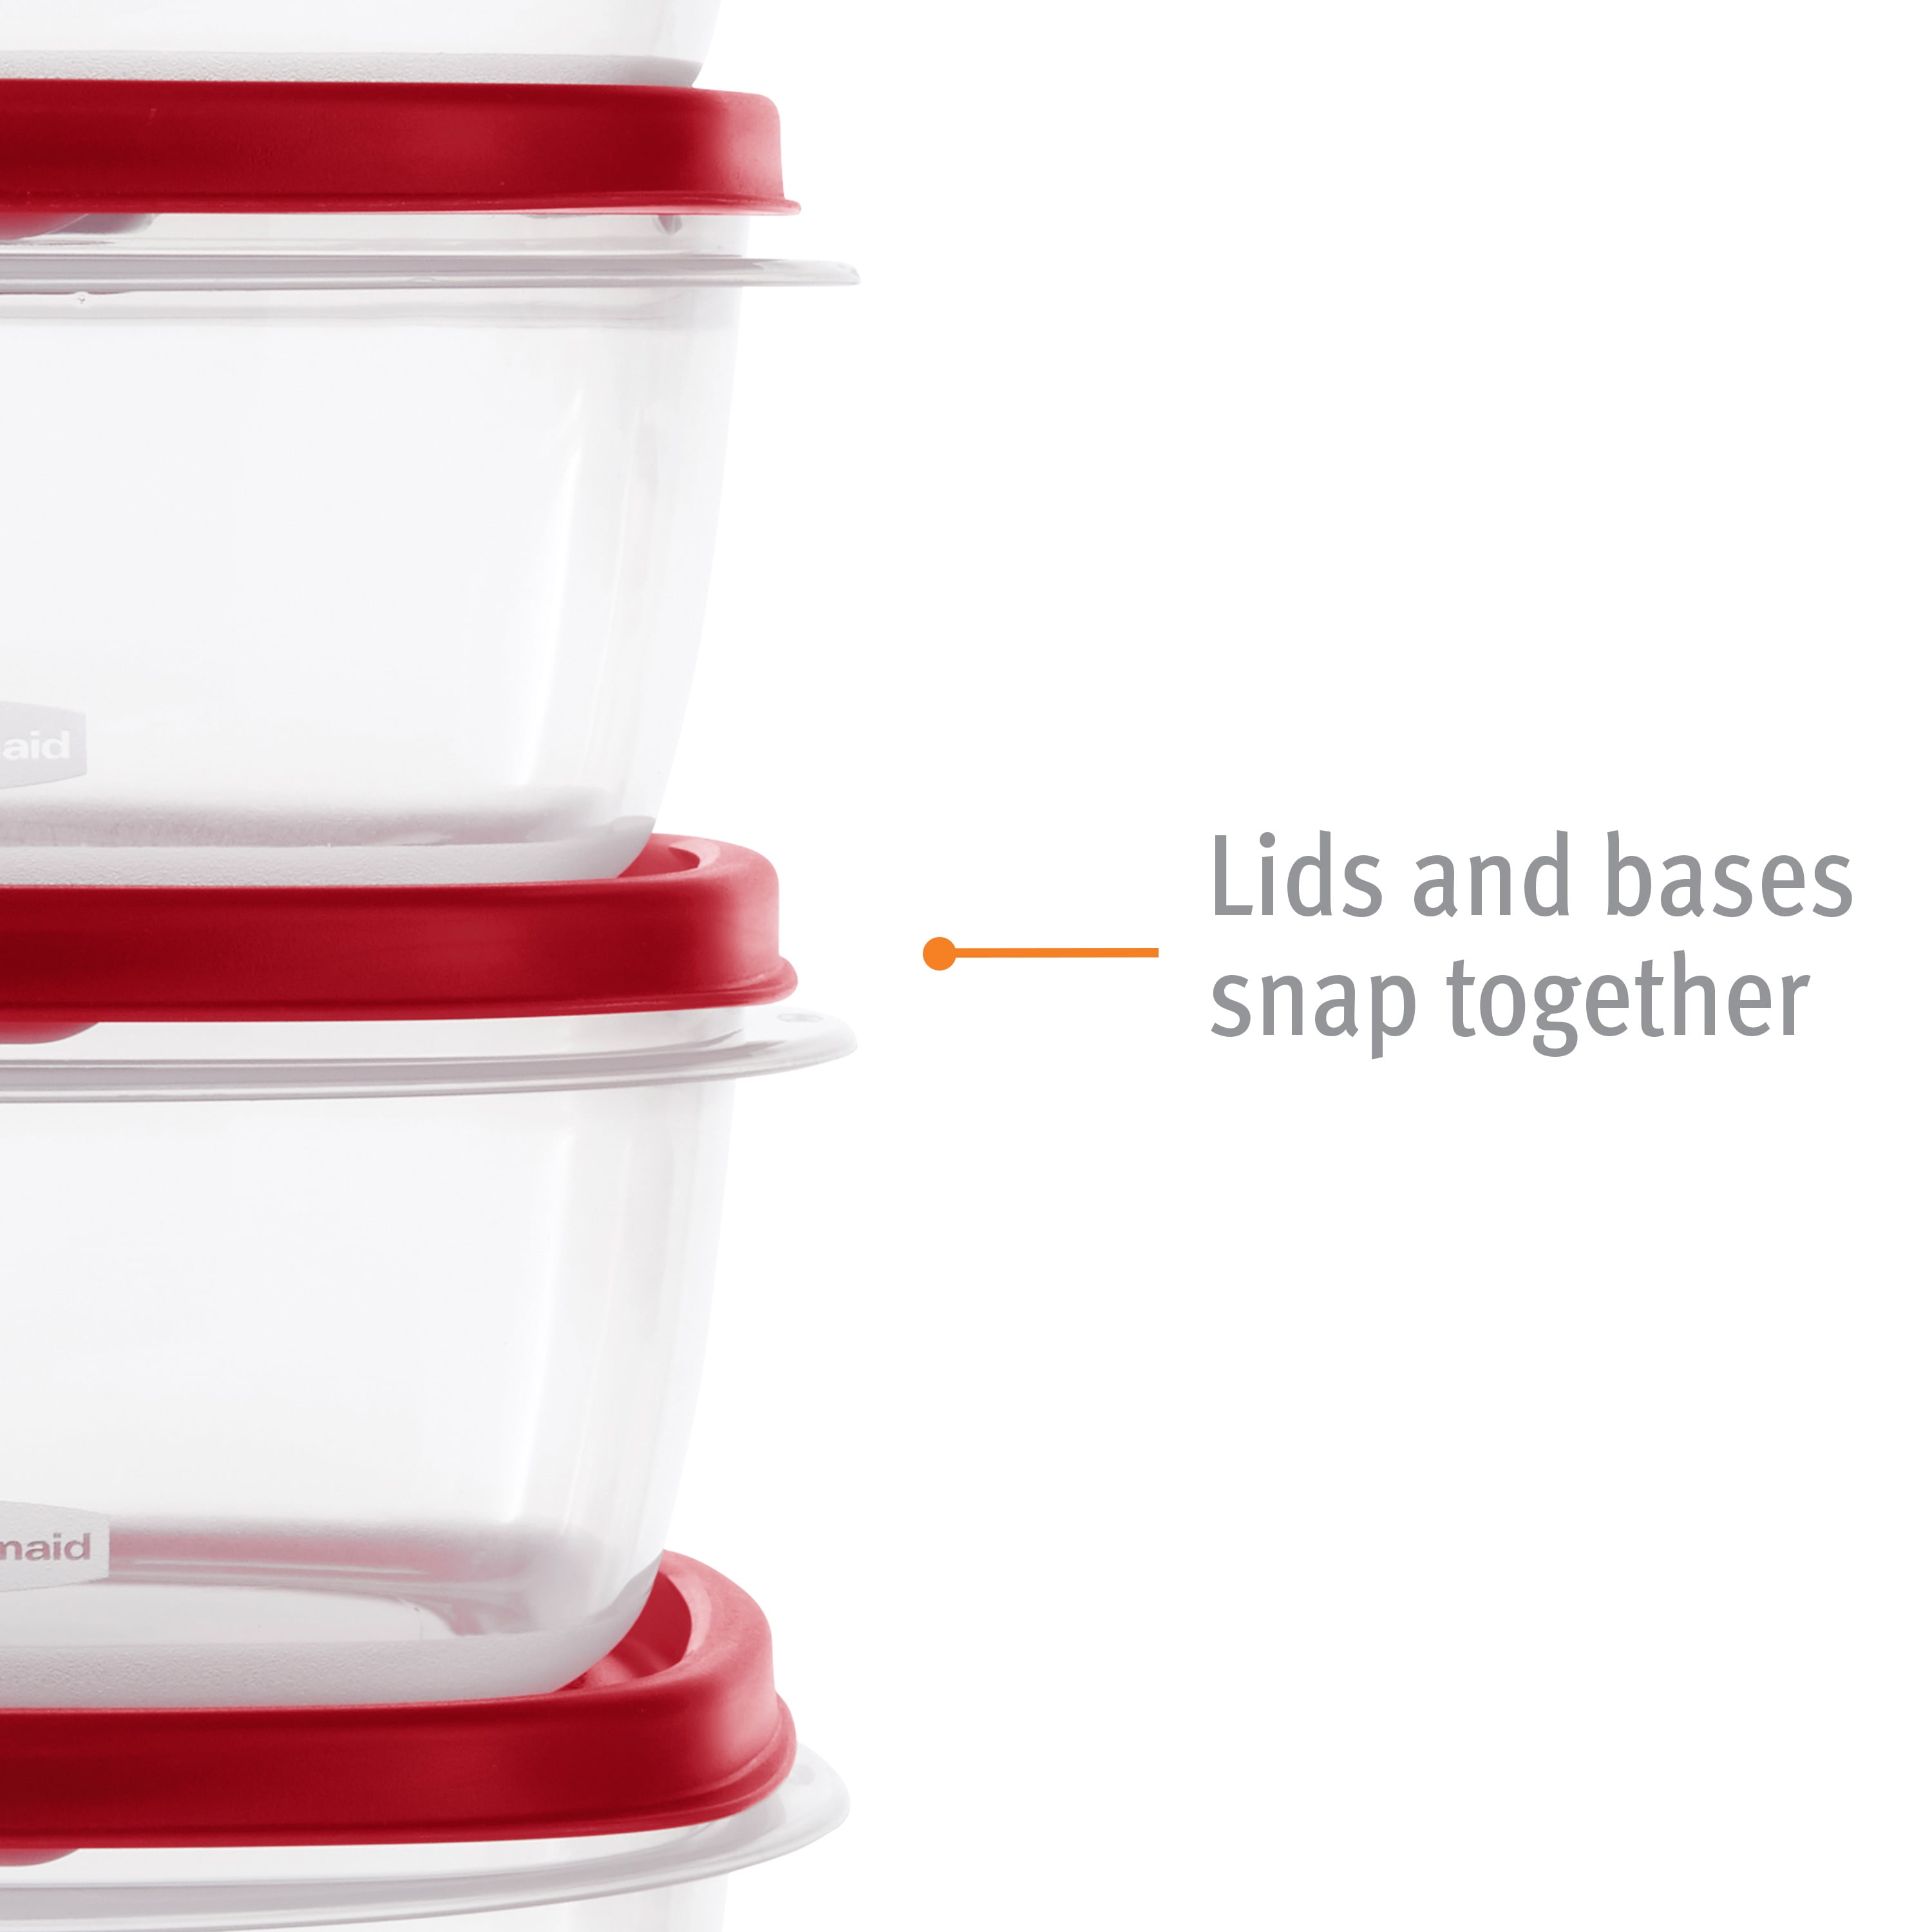 Rubbermaid 1777088 Food Storage Container 7 Cup Clear Base for sale online